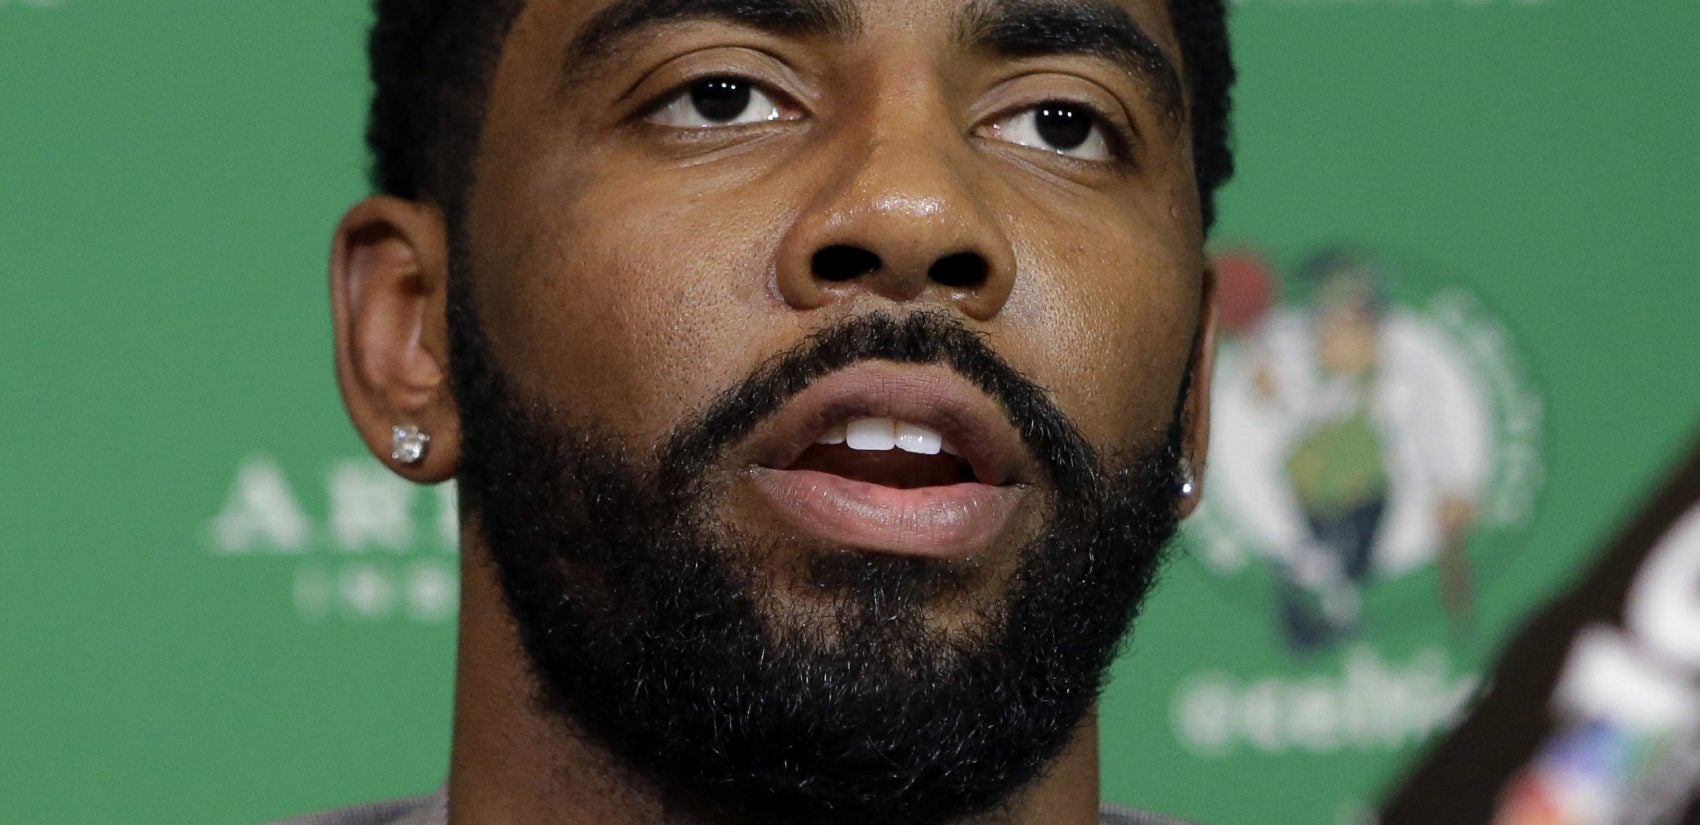 Boston Celtics' Kyrie Irving takes questions from reporters, Tuesday, June 12, 2018 during a news conference, in Boston. Irving spoke about the upcoming film 